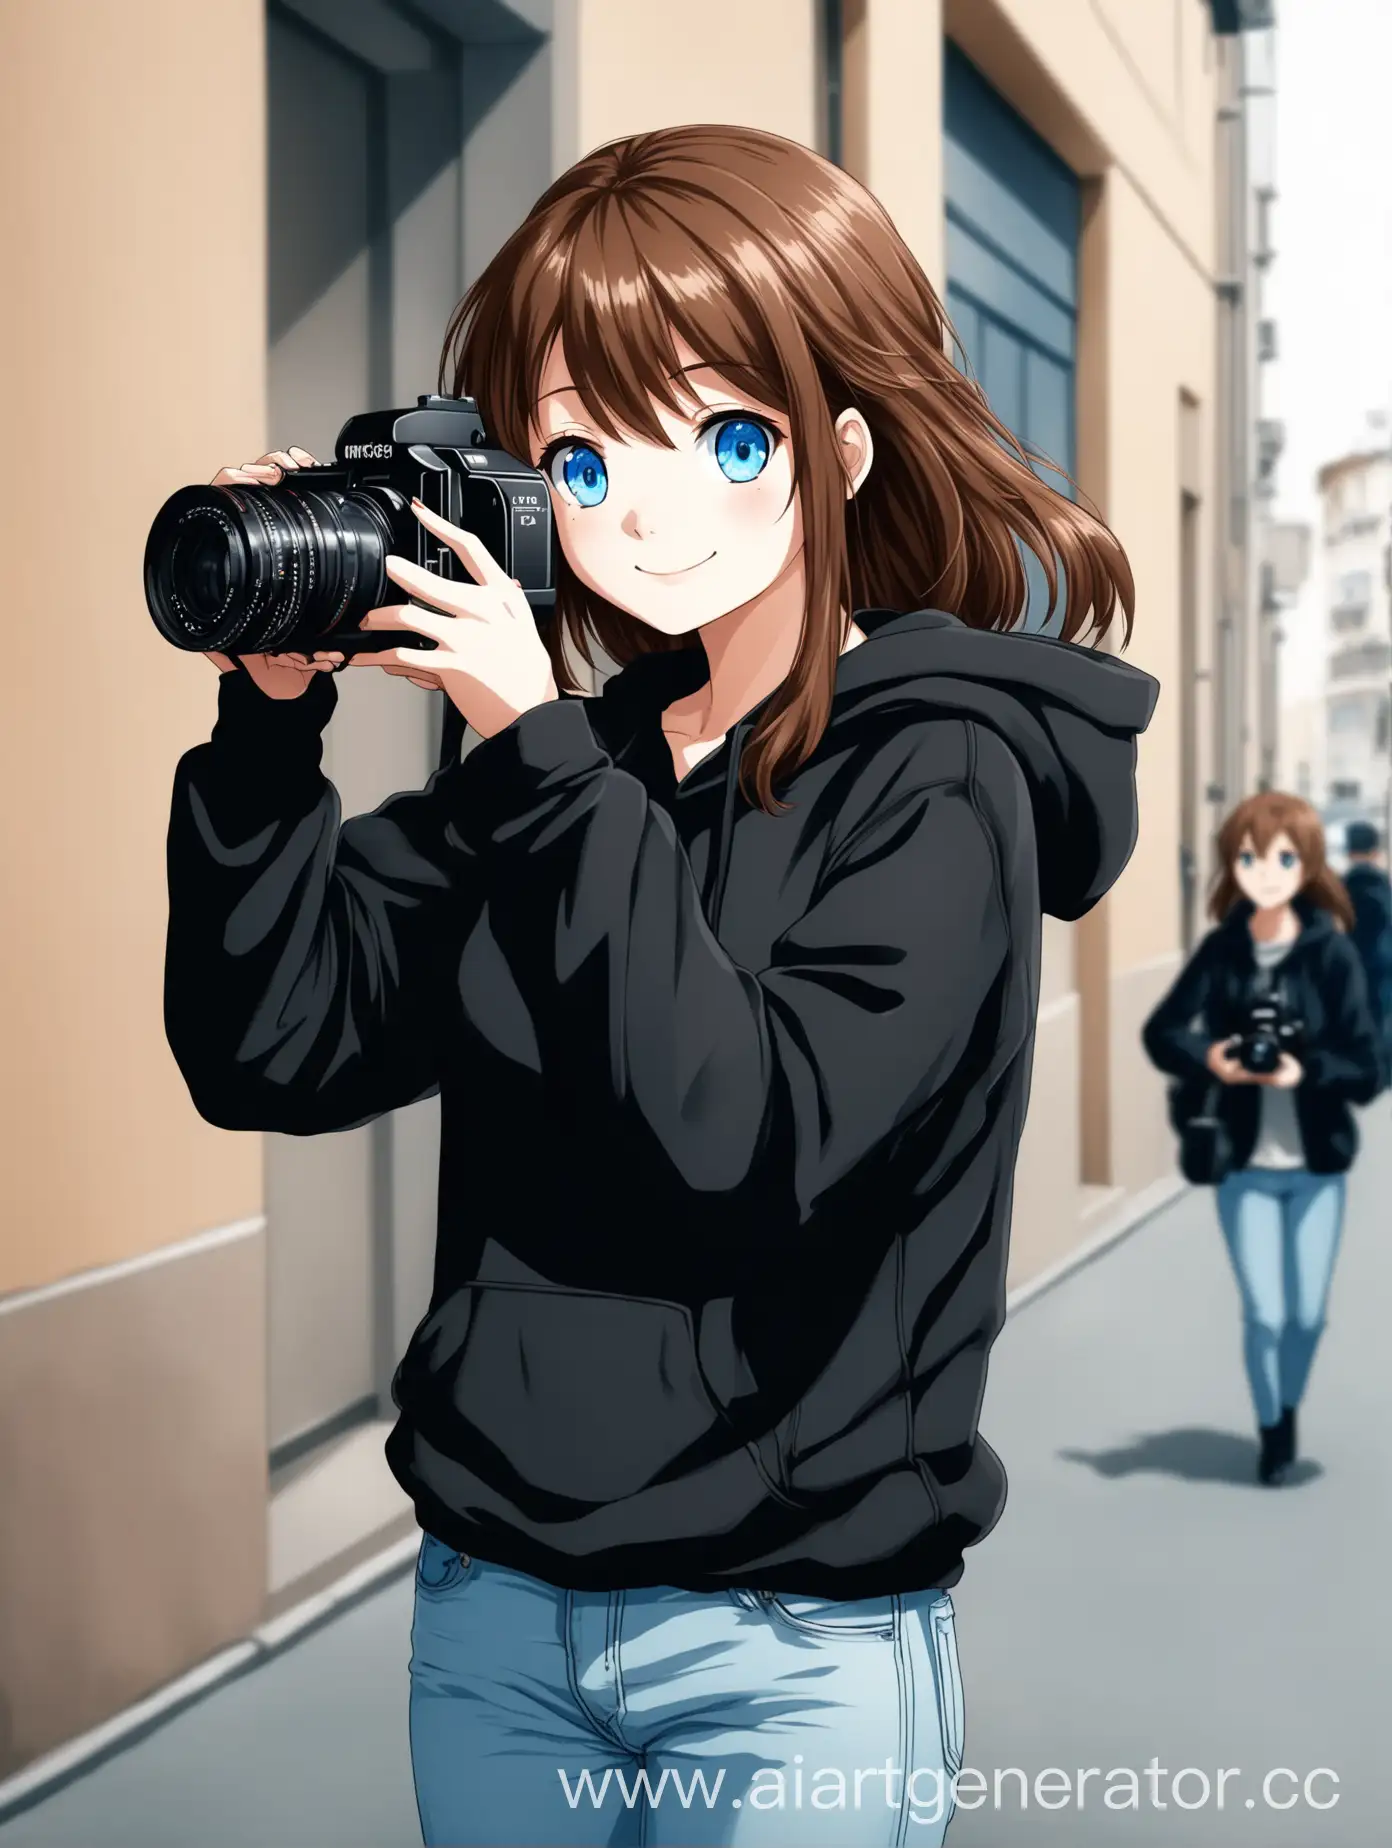 Smiling-Anime-Girl-Street-Photographer-with-Professional-Camera